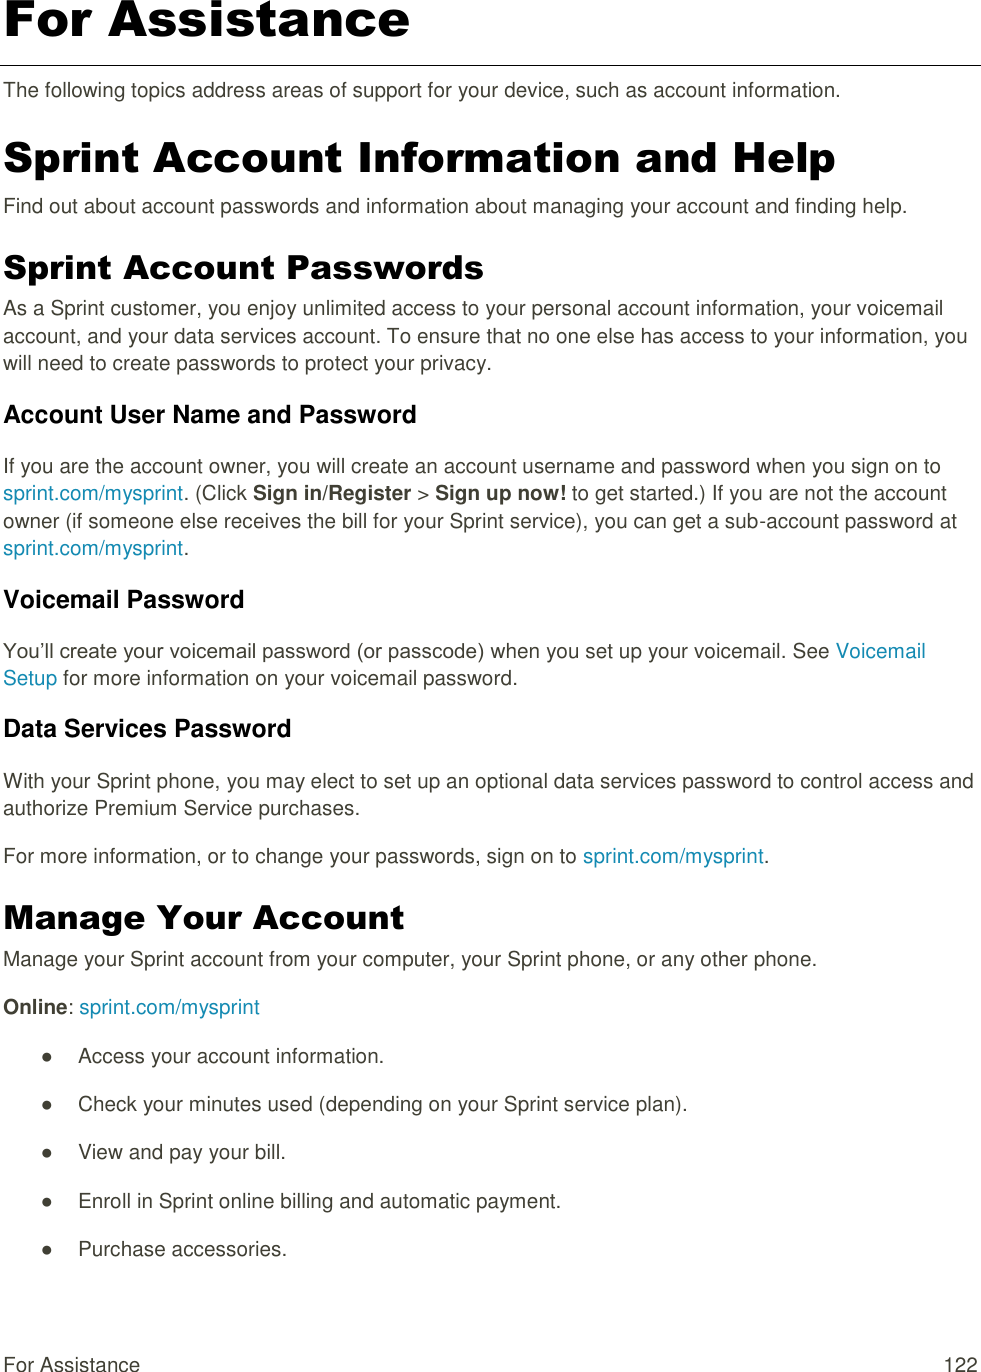 For Assistance  122 For Assistance The following topics address areas of support for your device, such as account information. Sprint Account Information and Help Find out about account passwords and information about managing your account and finding help. Sprint Account Passwords As a Sprint customer, you enjoy unlimited access to your personal account information, your voicemail account, and your data services account. To ensure that no one else has access to your information, you will need to create passwords to protect your privacy. Account User Name and Password If you are the account owner, you will create an account username and password when you sign on to sprint.com/mysprint. (Click Sign in/Register &gt; Sign up now! to get started.) If you are not the account owner (if someone else receives the bill for your Sprint service), you can get a sub-account password at sprint.com/mysprint. Voicemail Password You‘ll create your voicemail password (or passcode) when you set up your voicemail. See Voicemail Setup for more information on your voicemail password. Data Services Password With your Sprint phone, you may elect to set up an optional data services password to control access and authorize Premium Service purchases. For more information, or to change your passwords, sign on to sprint.com/mysprint. Manage Your Account Manage your Sprint account from your computer, your Sprint phone, or any other phone. Online: sprint.com/mysprint ●  Access your account information. ●  Check your minutes used (depending on your Sprint service plan). ●  View and pay your bill. ●  Enroll in Sprint online billing and automatic payment. ●  Purchase accessories. 